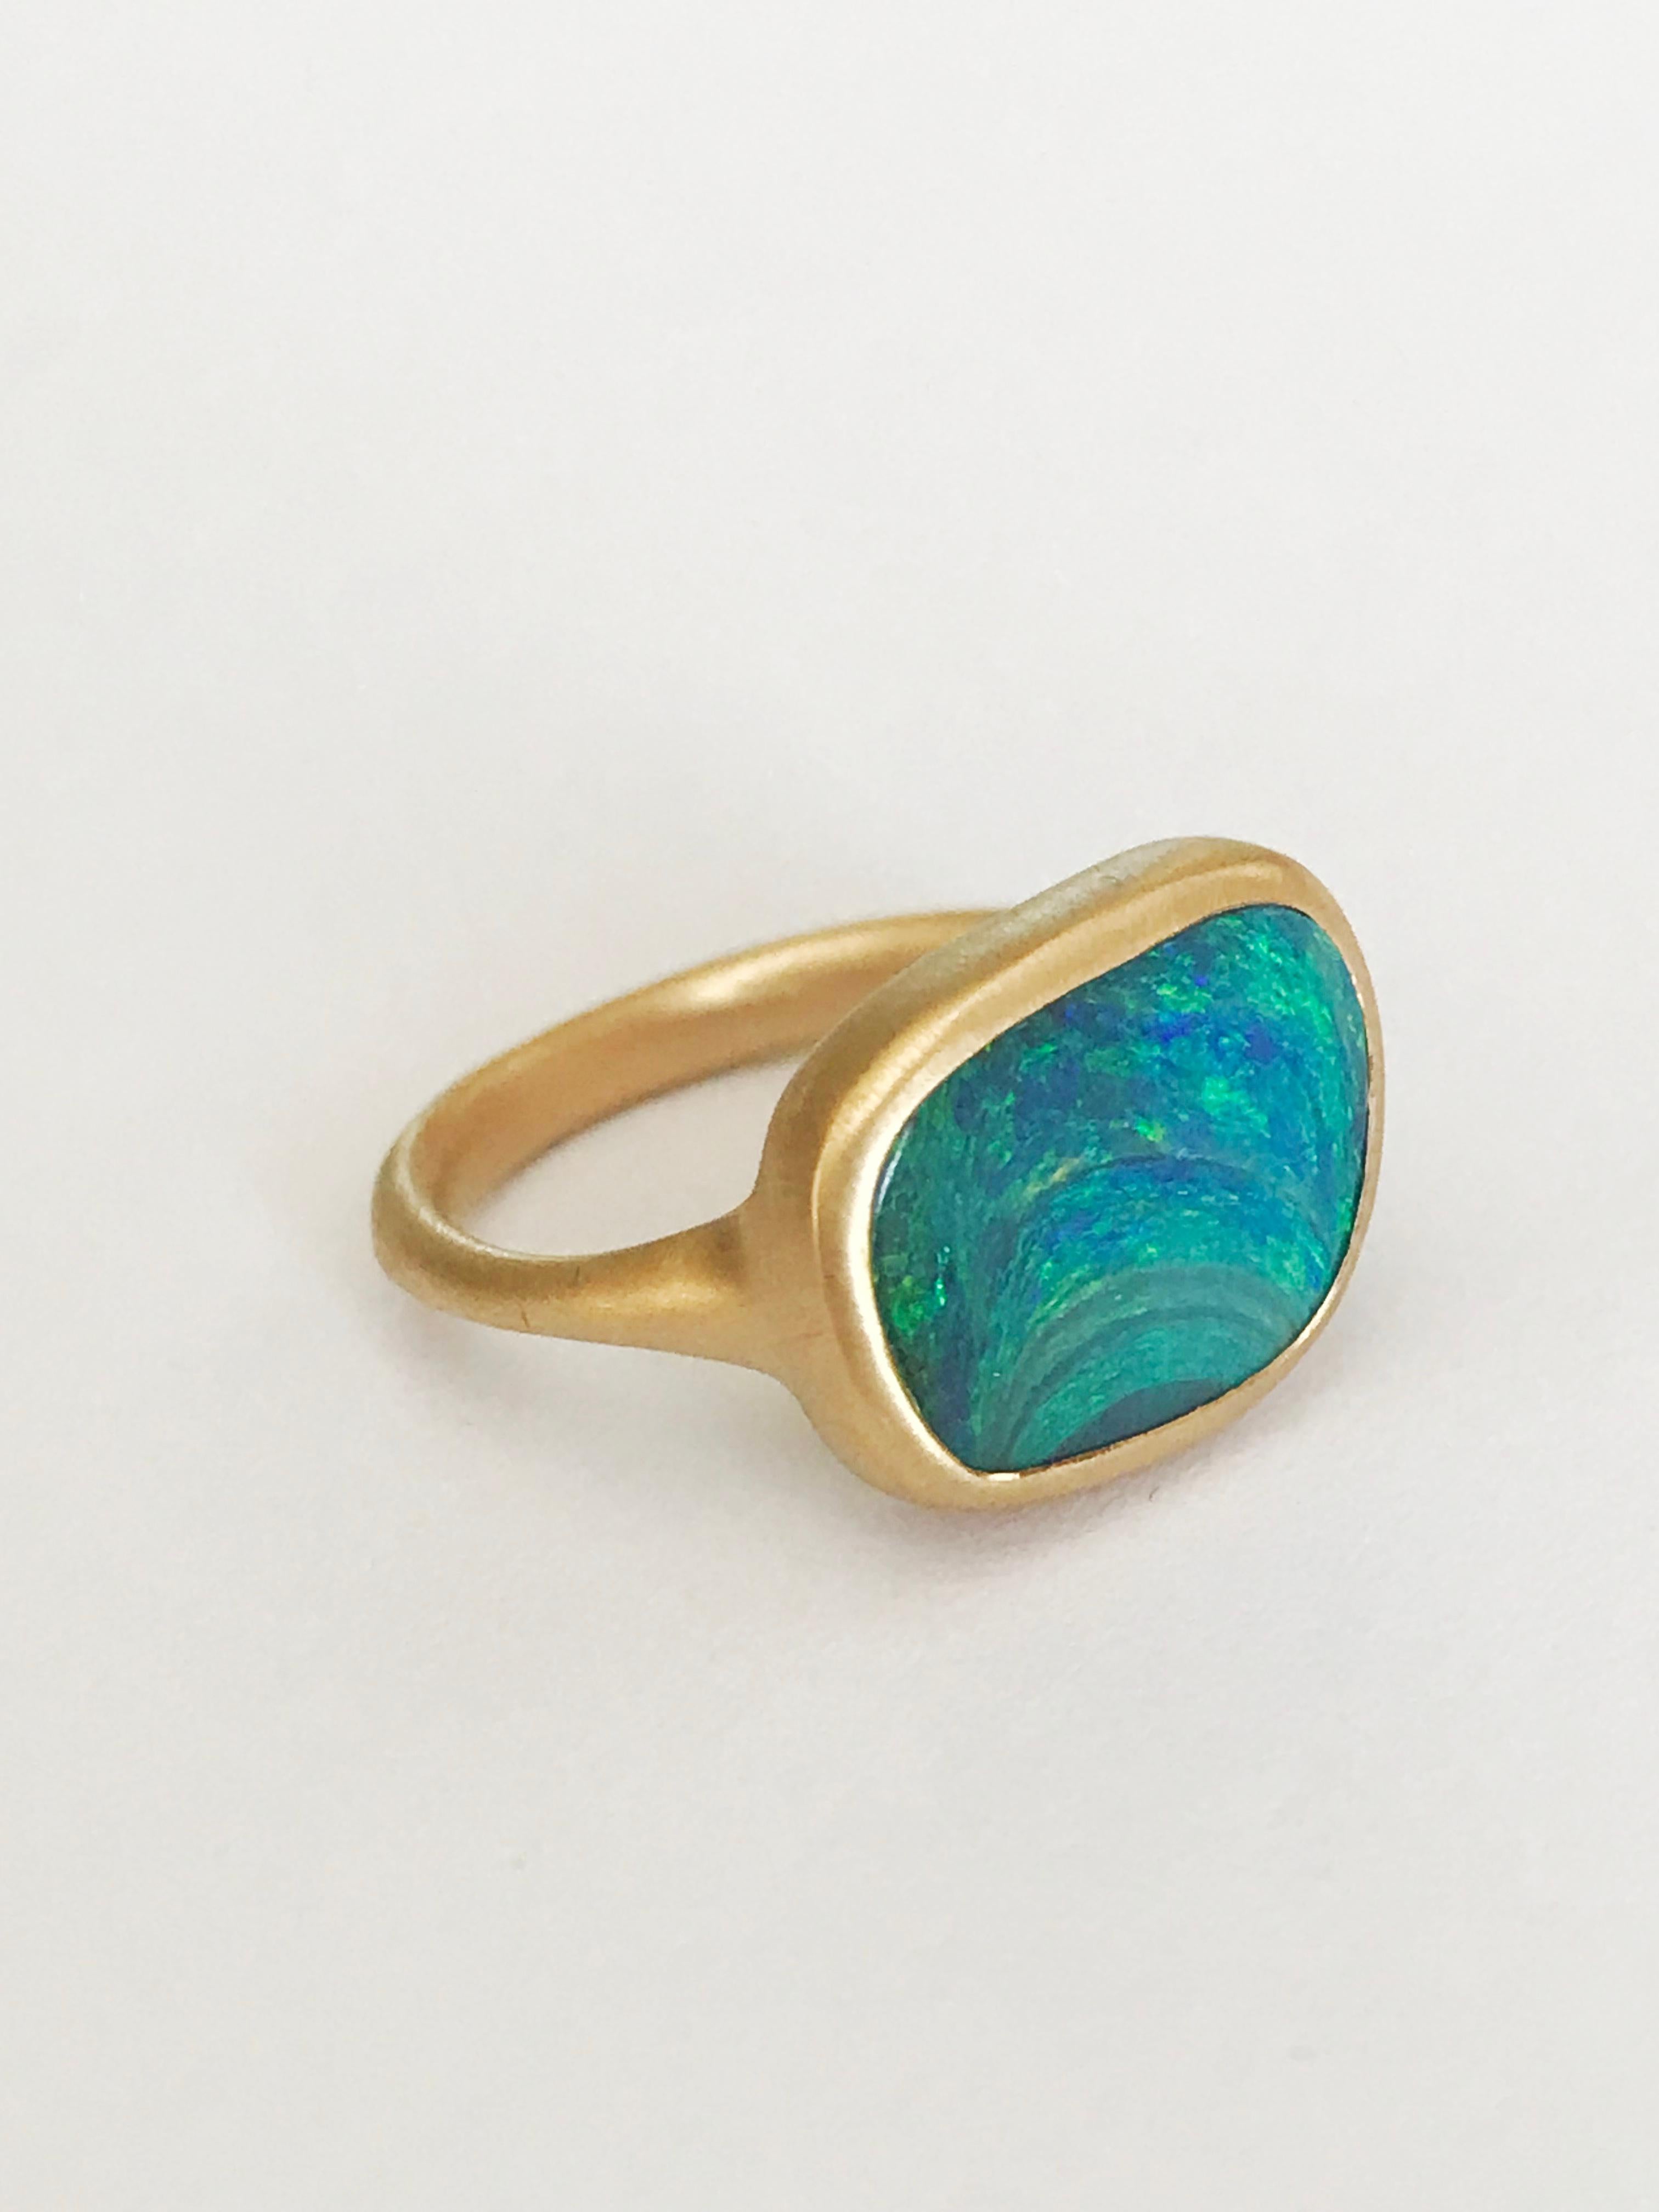 Dalben Blue Green Boulder Opal Yellow Gold Ring For Sale 1